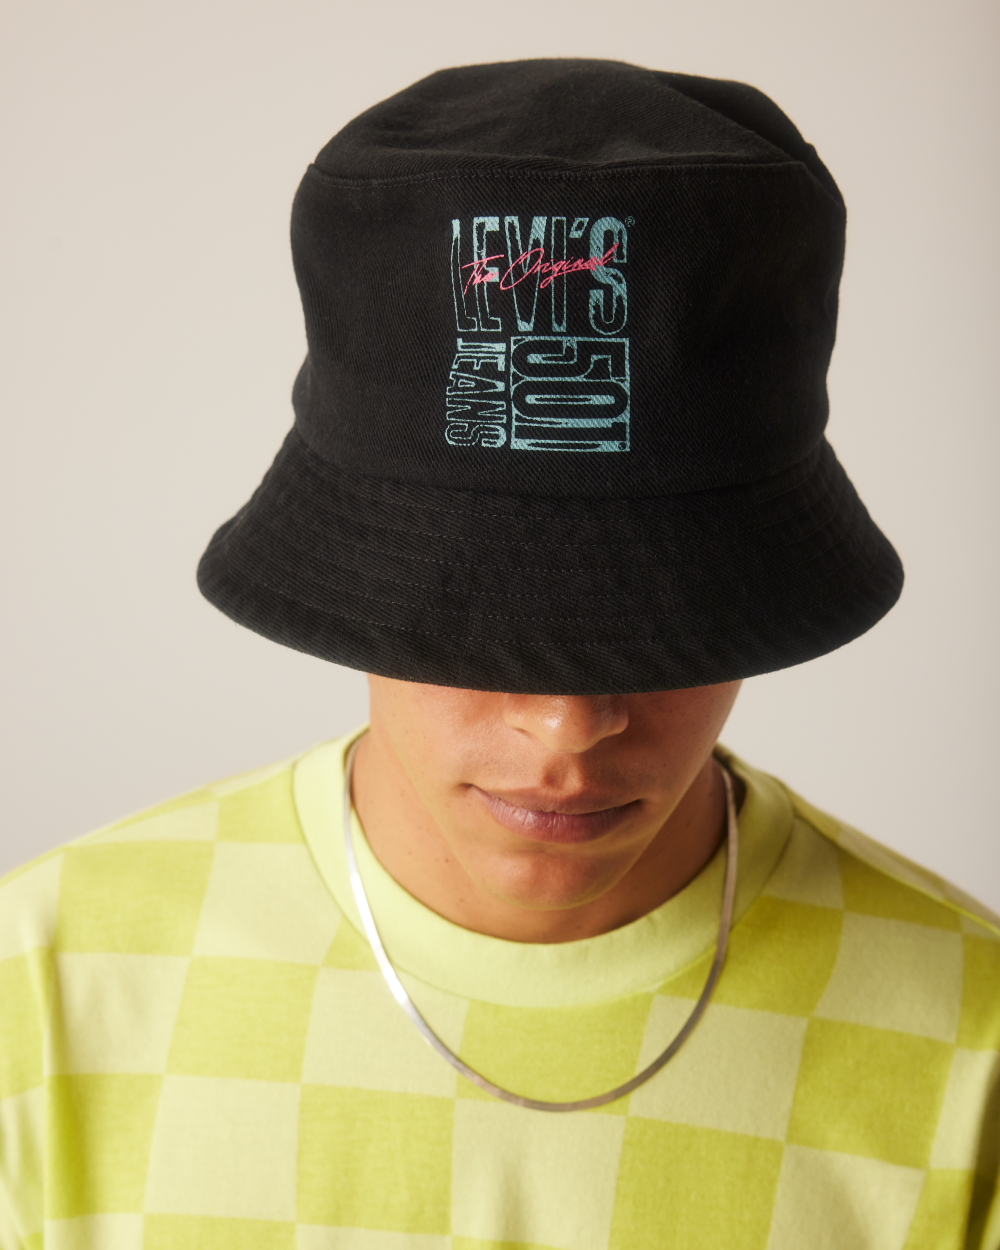 Man styled in Levi's 501 Graphic Bucket Hat - Levi's Hong Kong